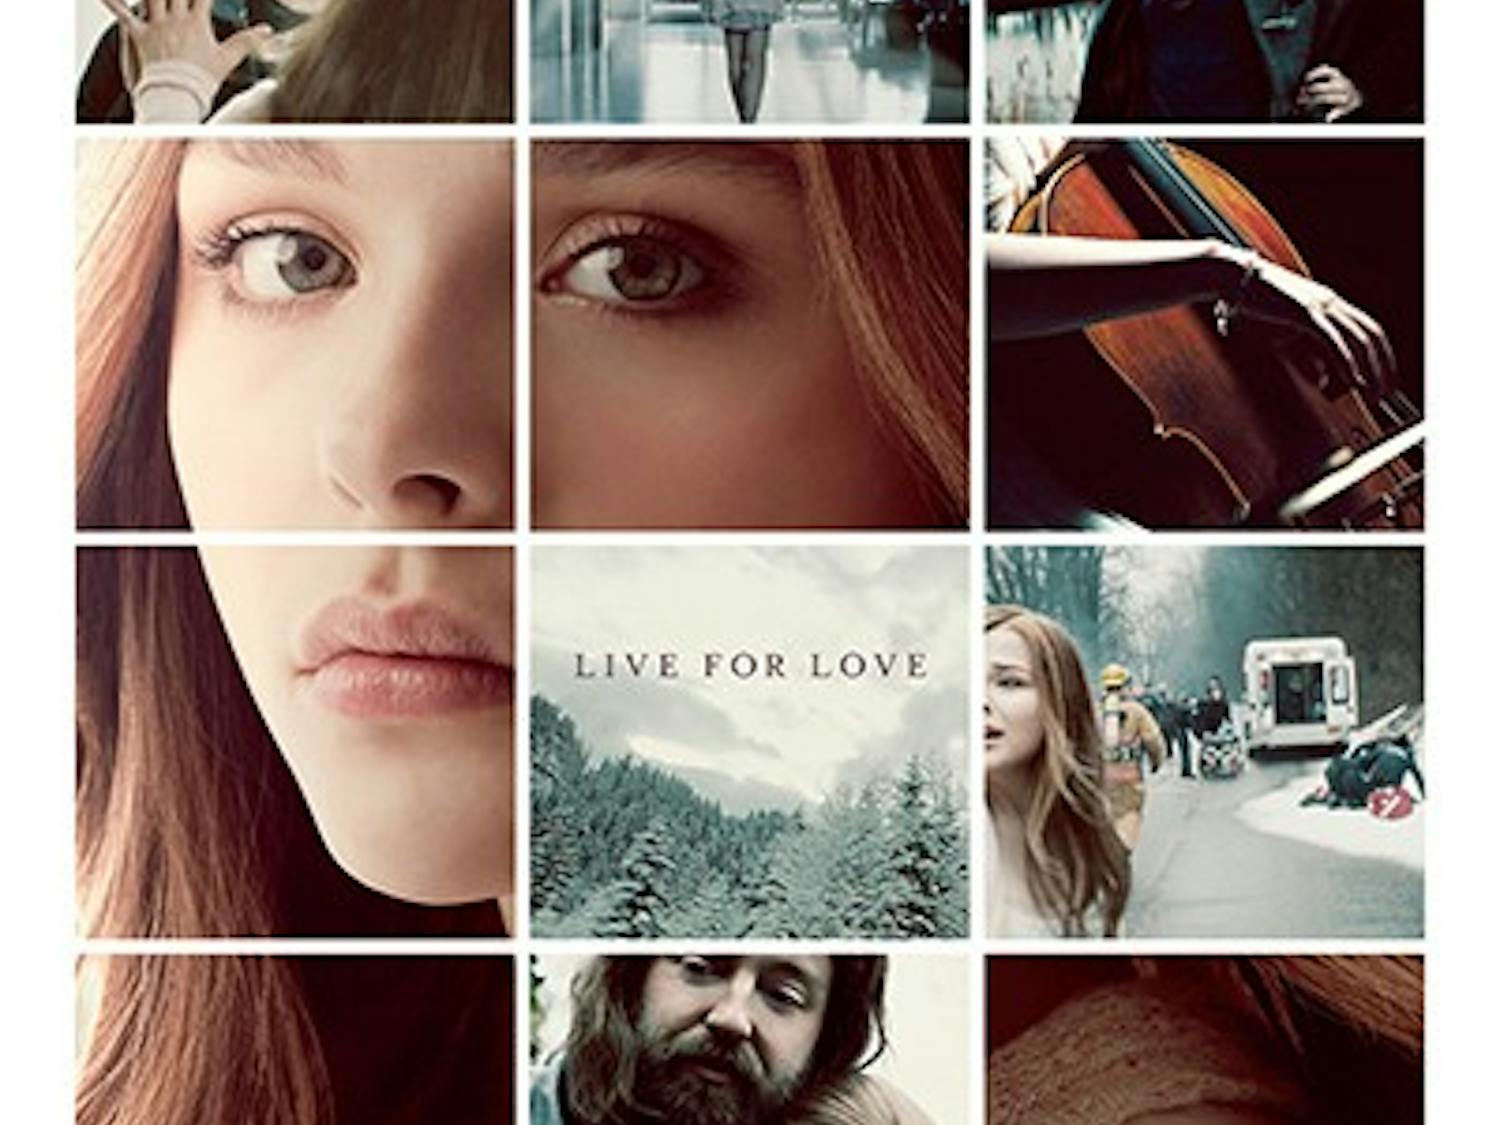 305590id1a_IFIStay_AdvanceMain_27x40_1Sheet.indd